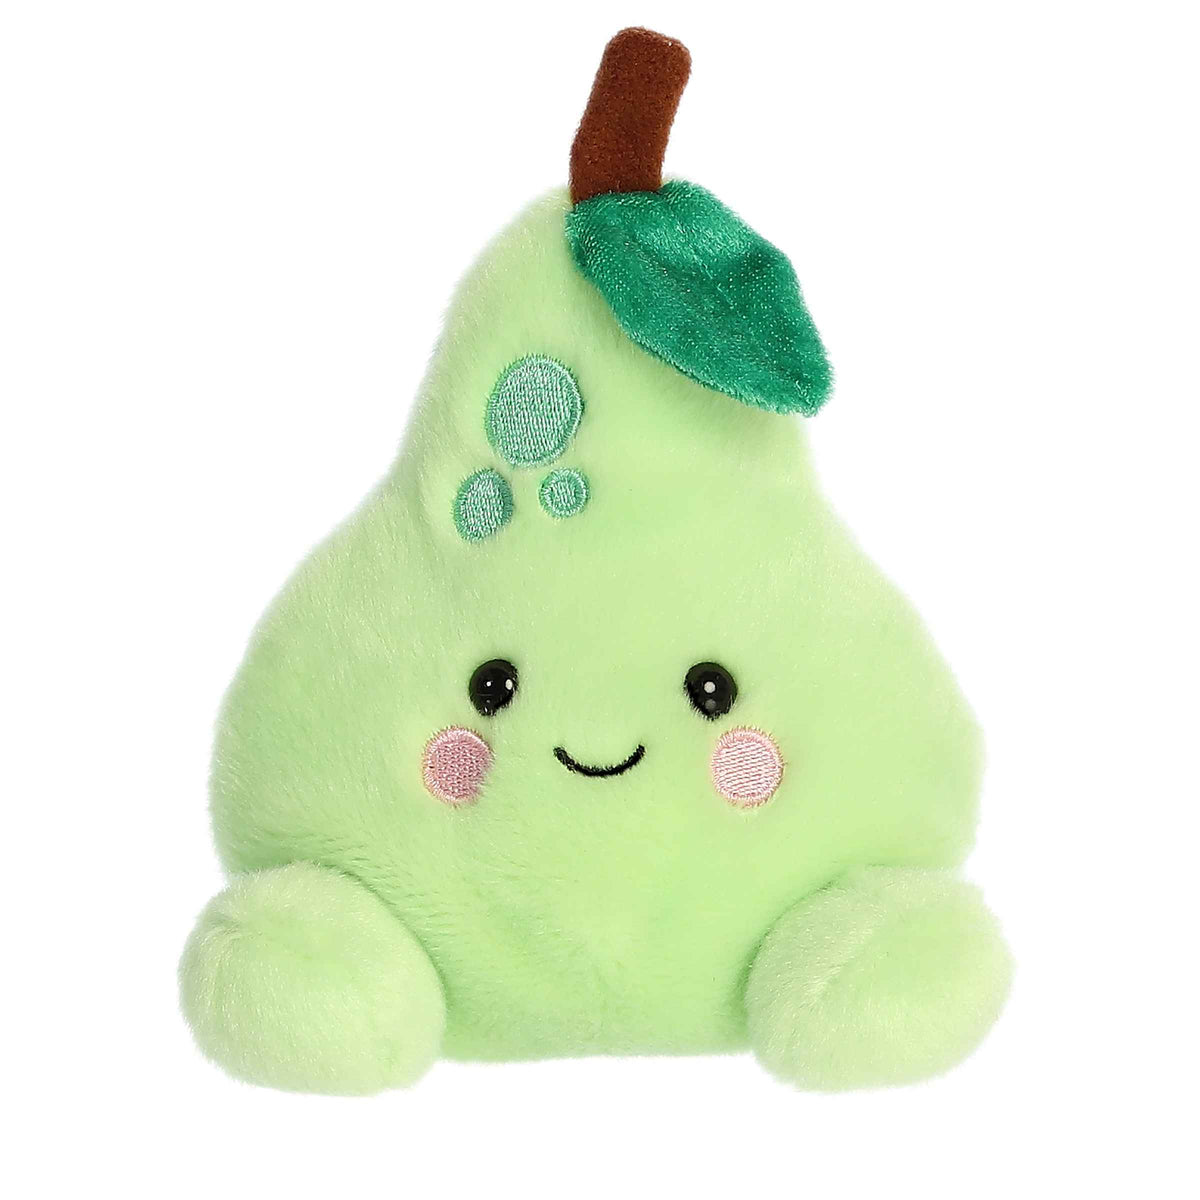 Bartlett Pear plush from Palm Pals, green with lighter speckles, leaf and stem